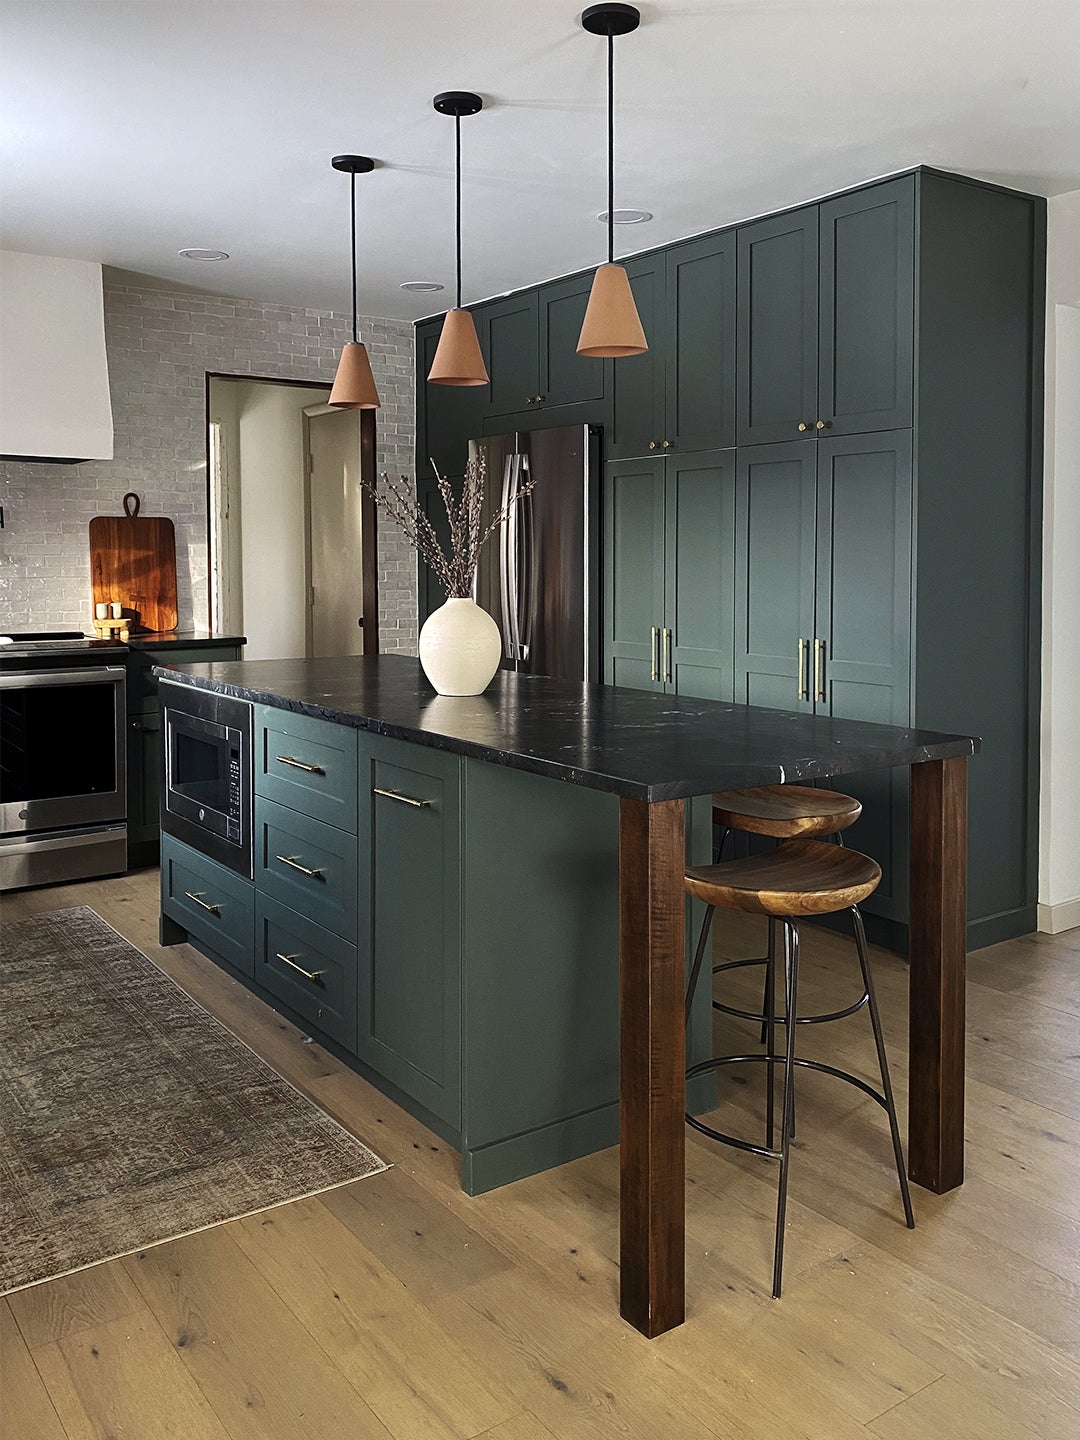 One Shade of Green and Three Types of IKEA Cabinets Transformed This 1980s Kitchen